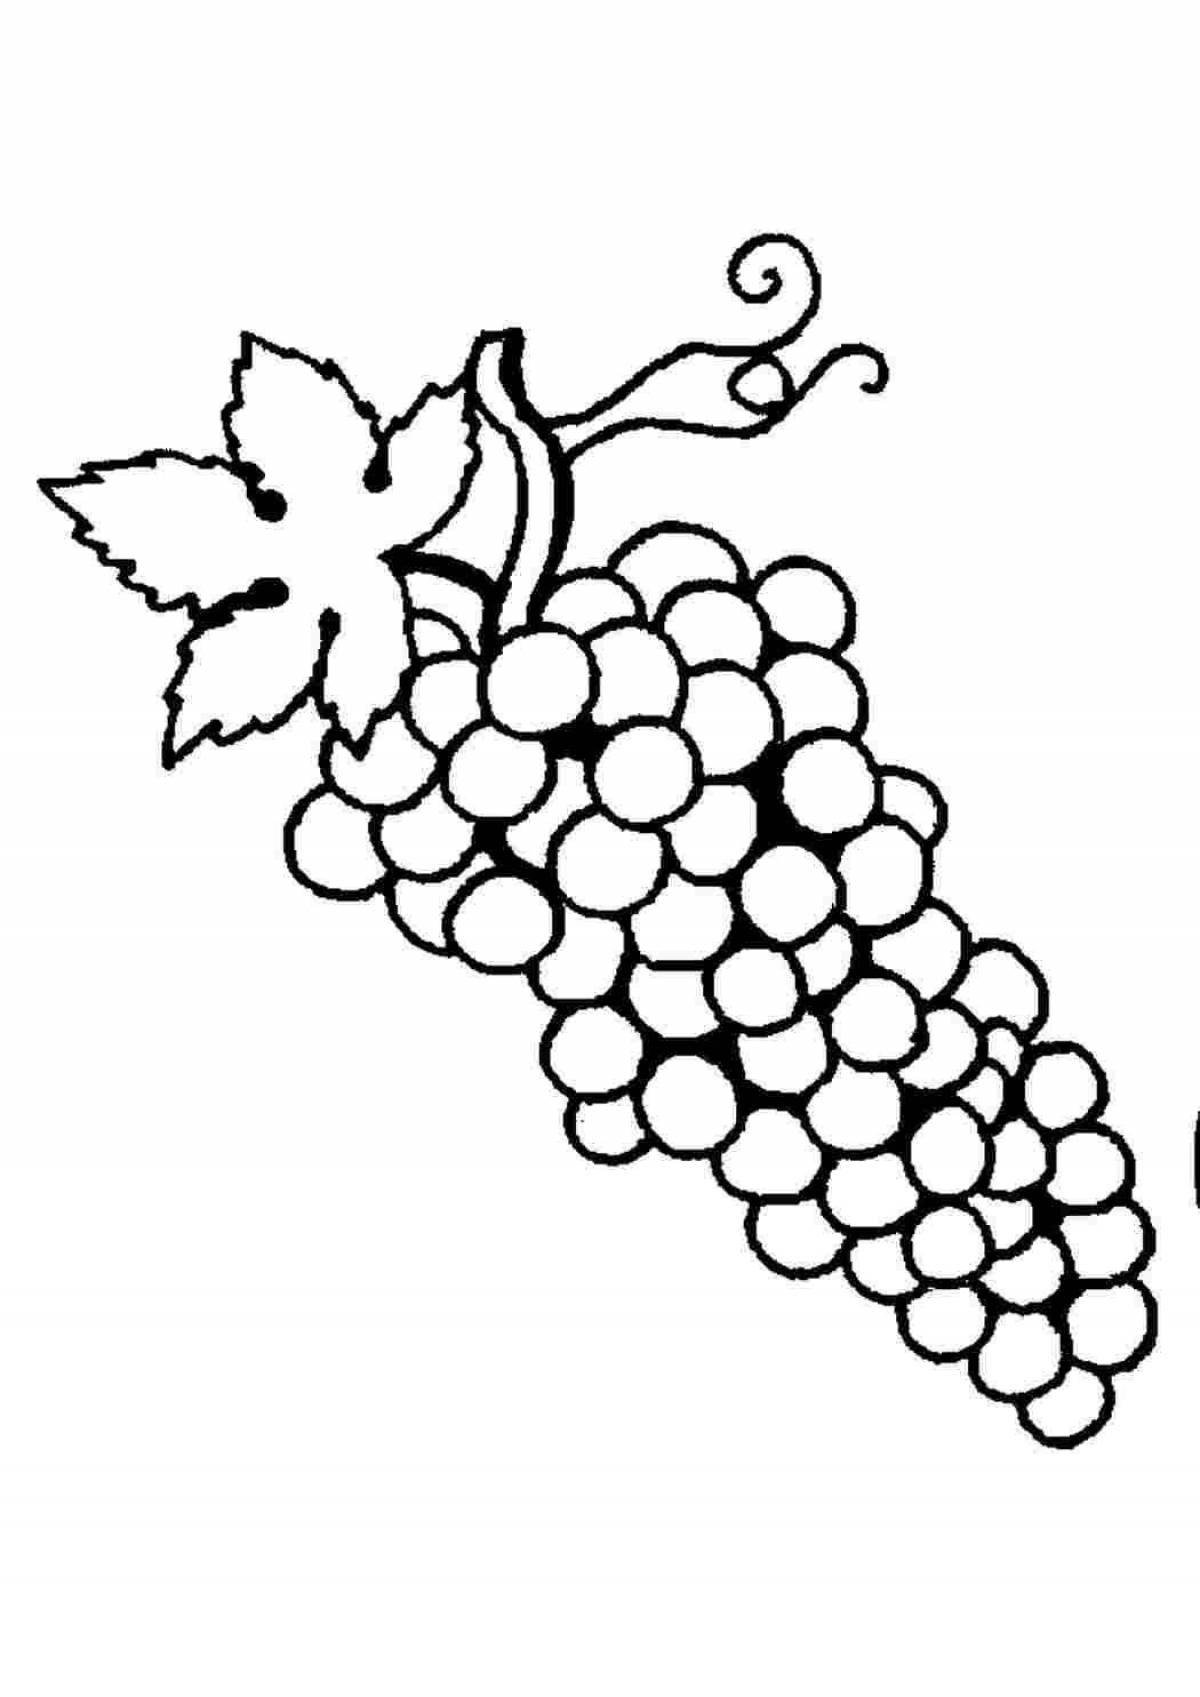 Playful grape coloring page for kids